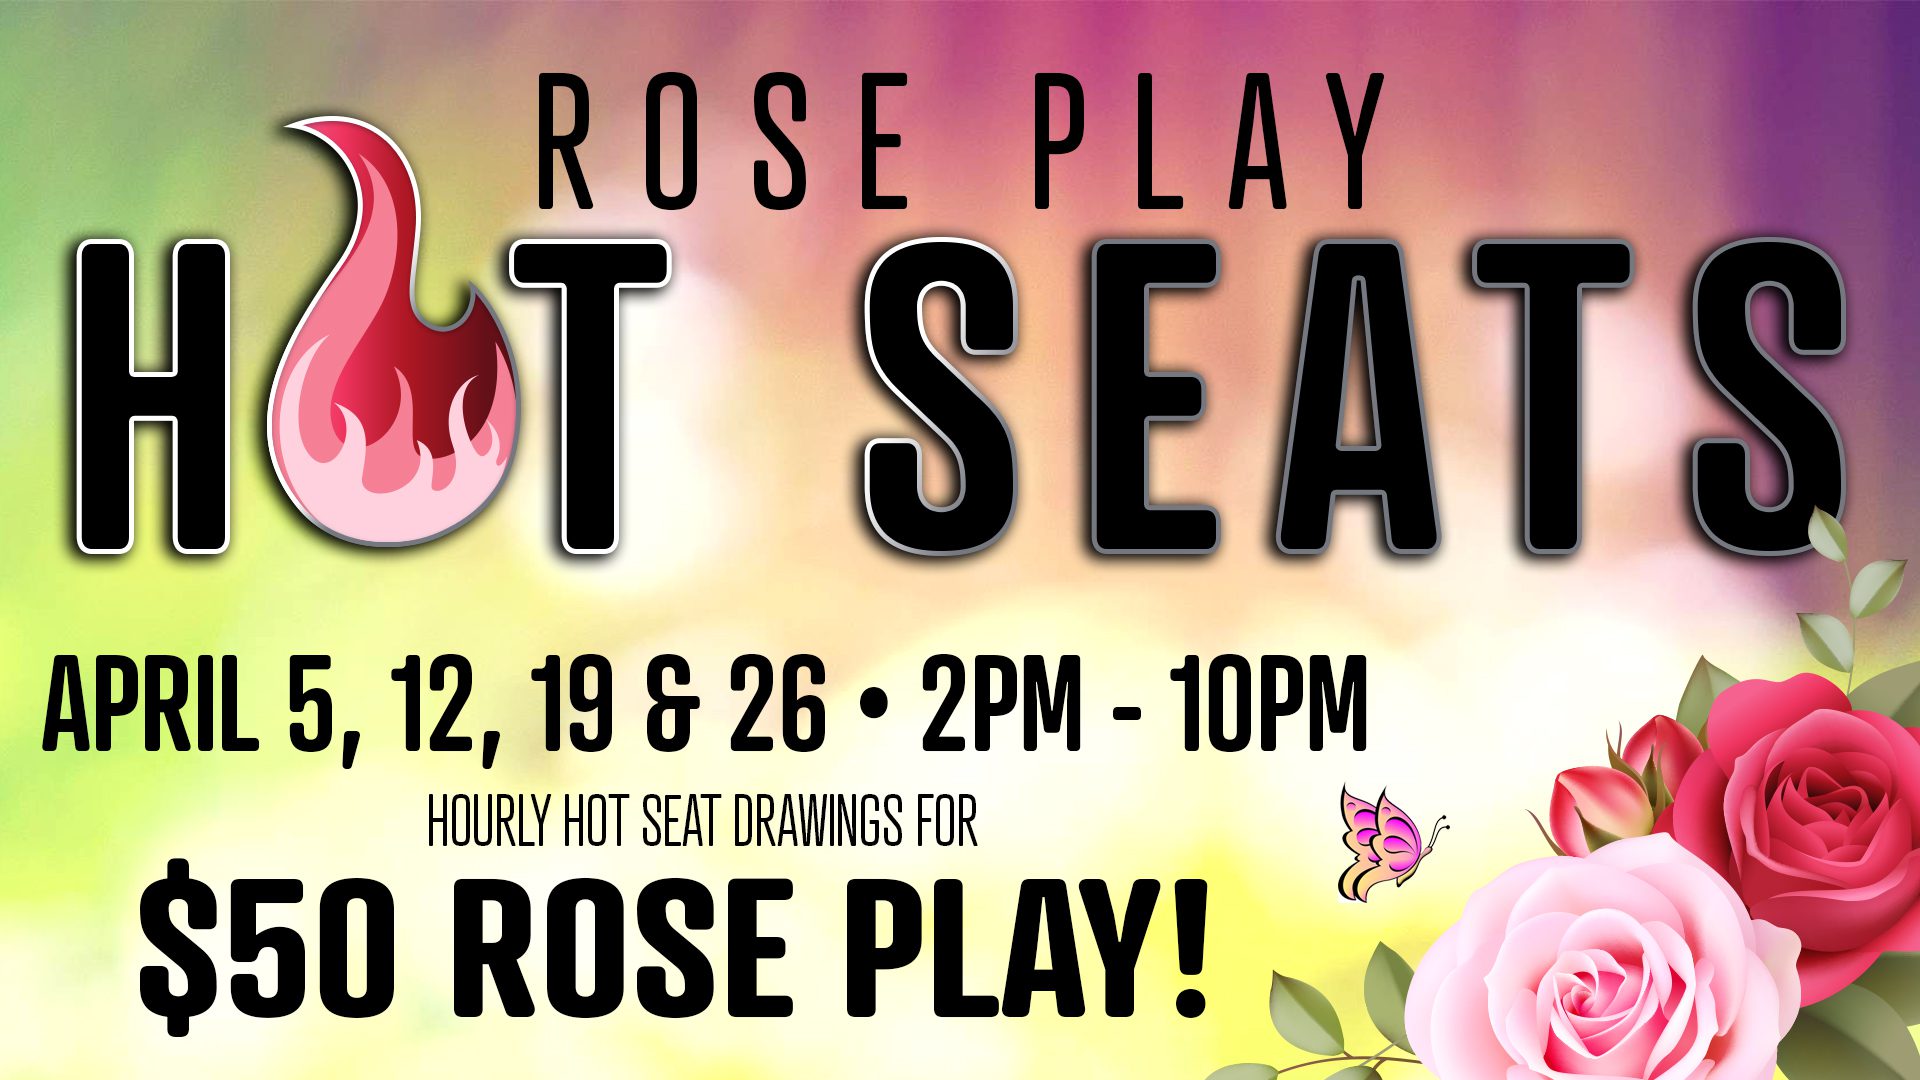 Promotional poster for "rose play hot seats" event with hourly seat drawings for $50 rose play, scheduled for april 5, 12, 19 & 26 from 2 pm to 10 pm, featuring flame and rose graphics.